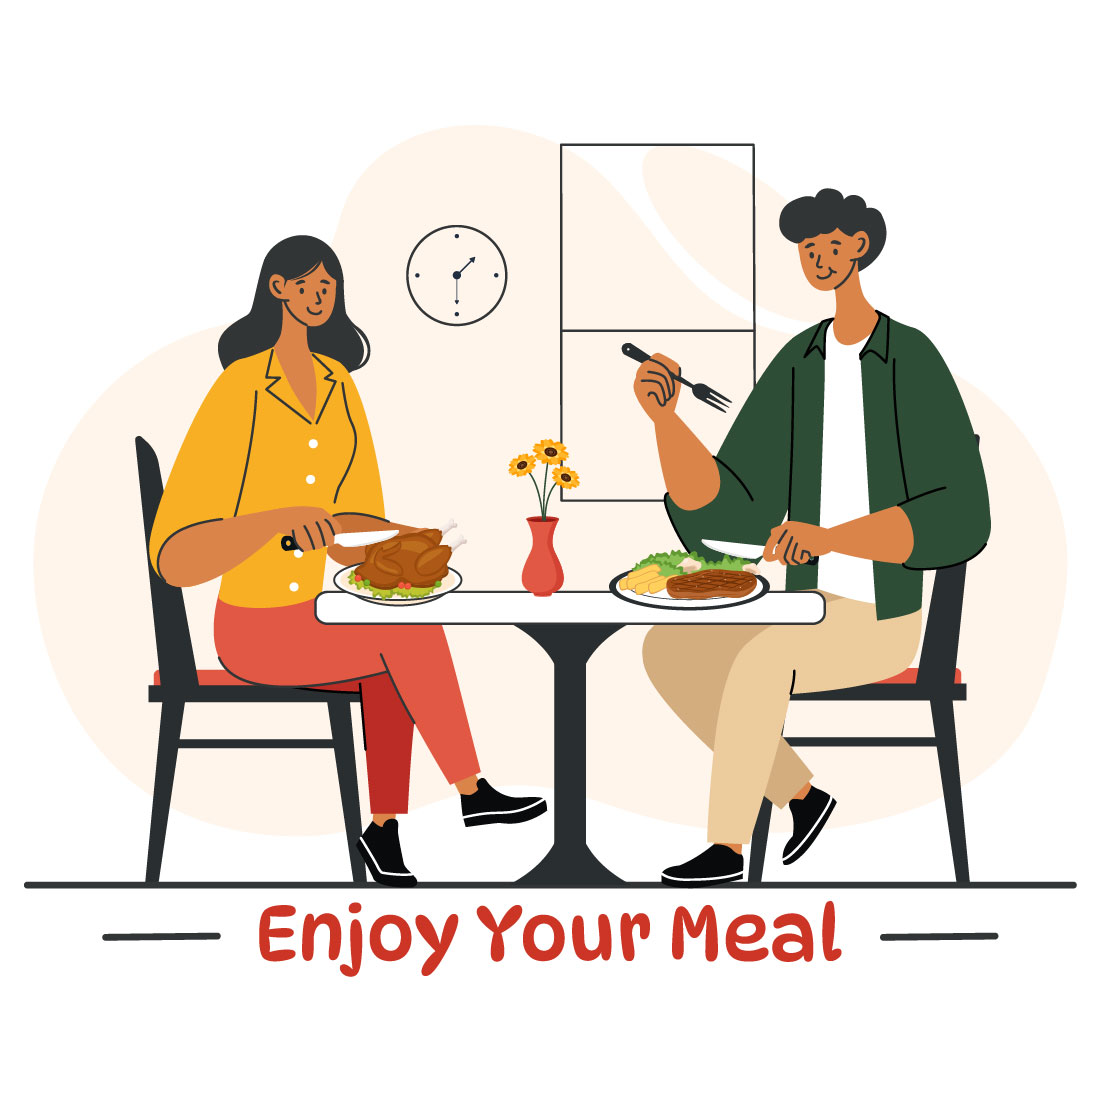 9 Enjoy Your Meal Vector Illustration cover image.